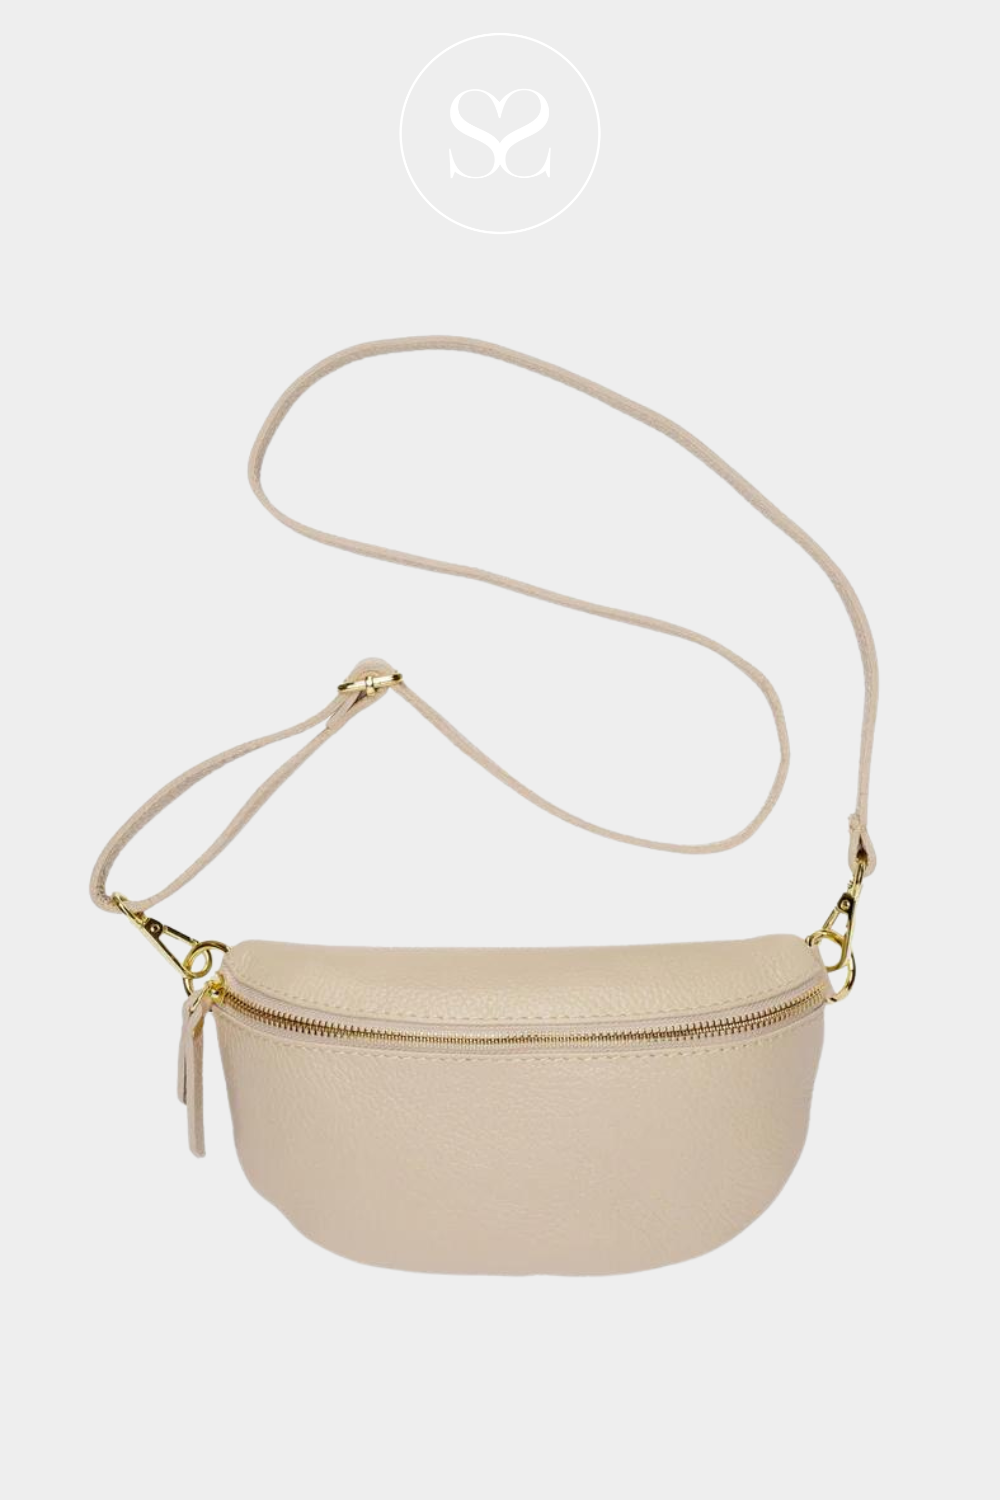 Sling Crossbody bag in cream from Elie Beaumont